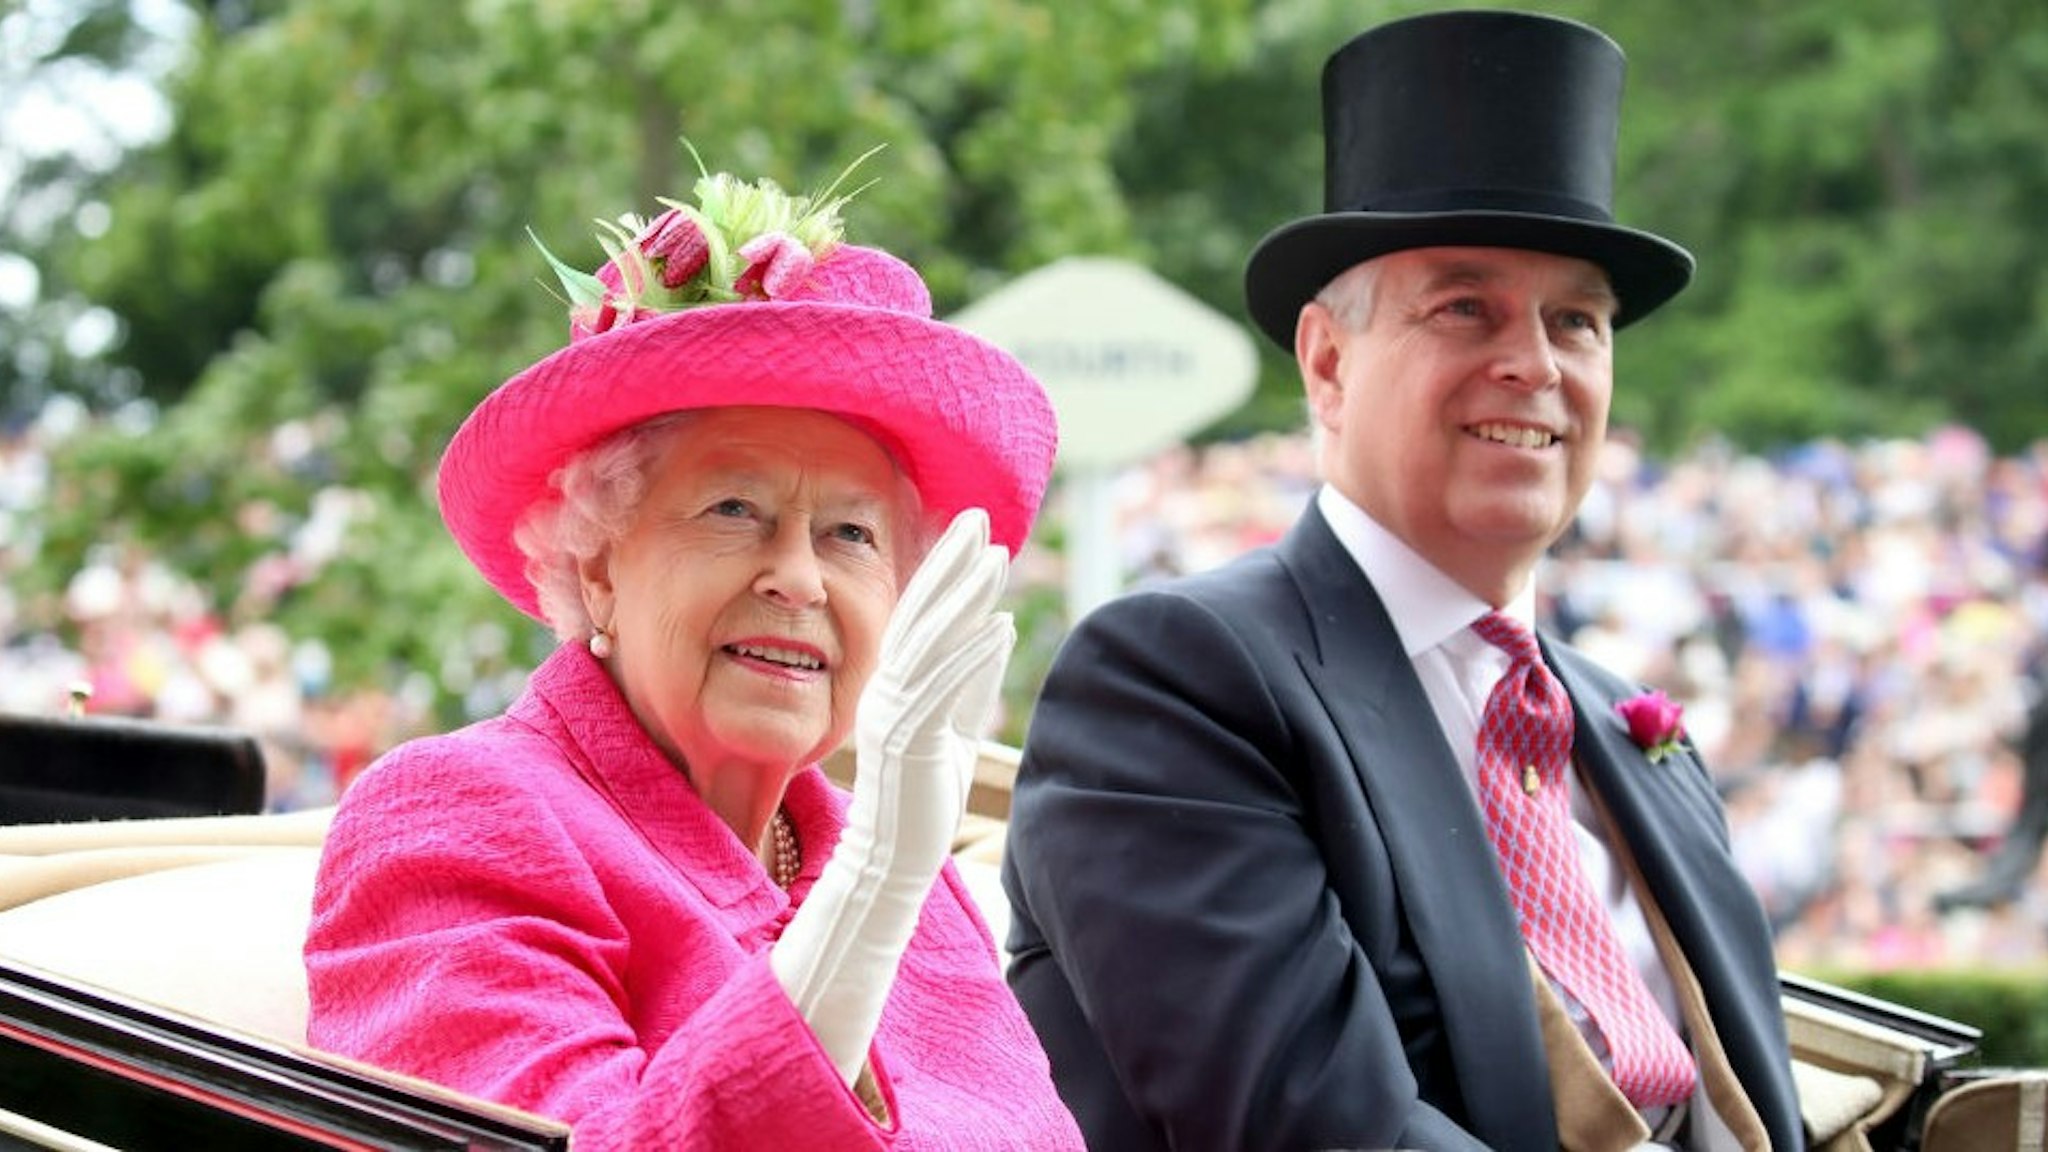 ASCOT, ENGLAND - JUNE 22: Queen Elizabeth II and Prince Andrew, Duke of York attend Royal Ascot 2017 at Ascot Racecourse on June 22, 2017 in Ascot, England. (Photo by